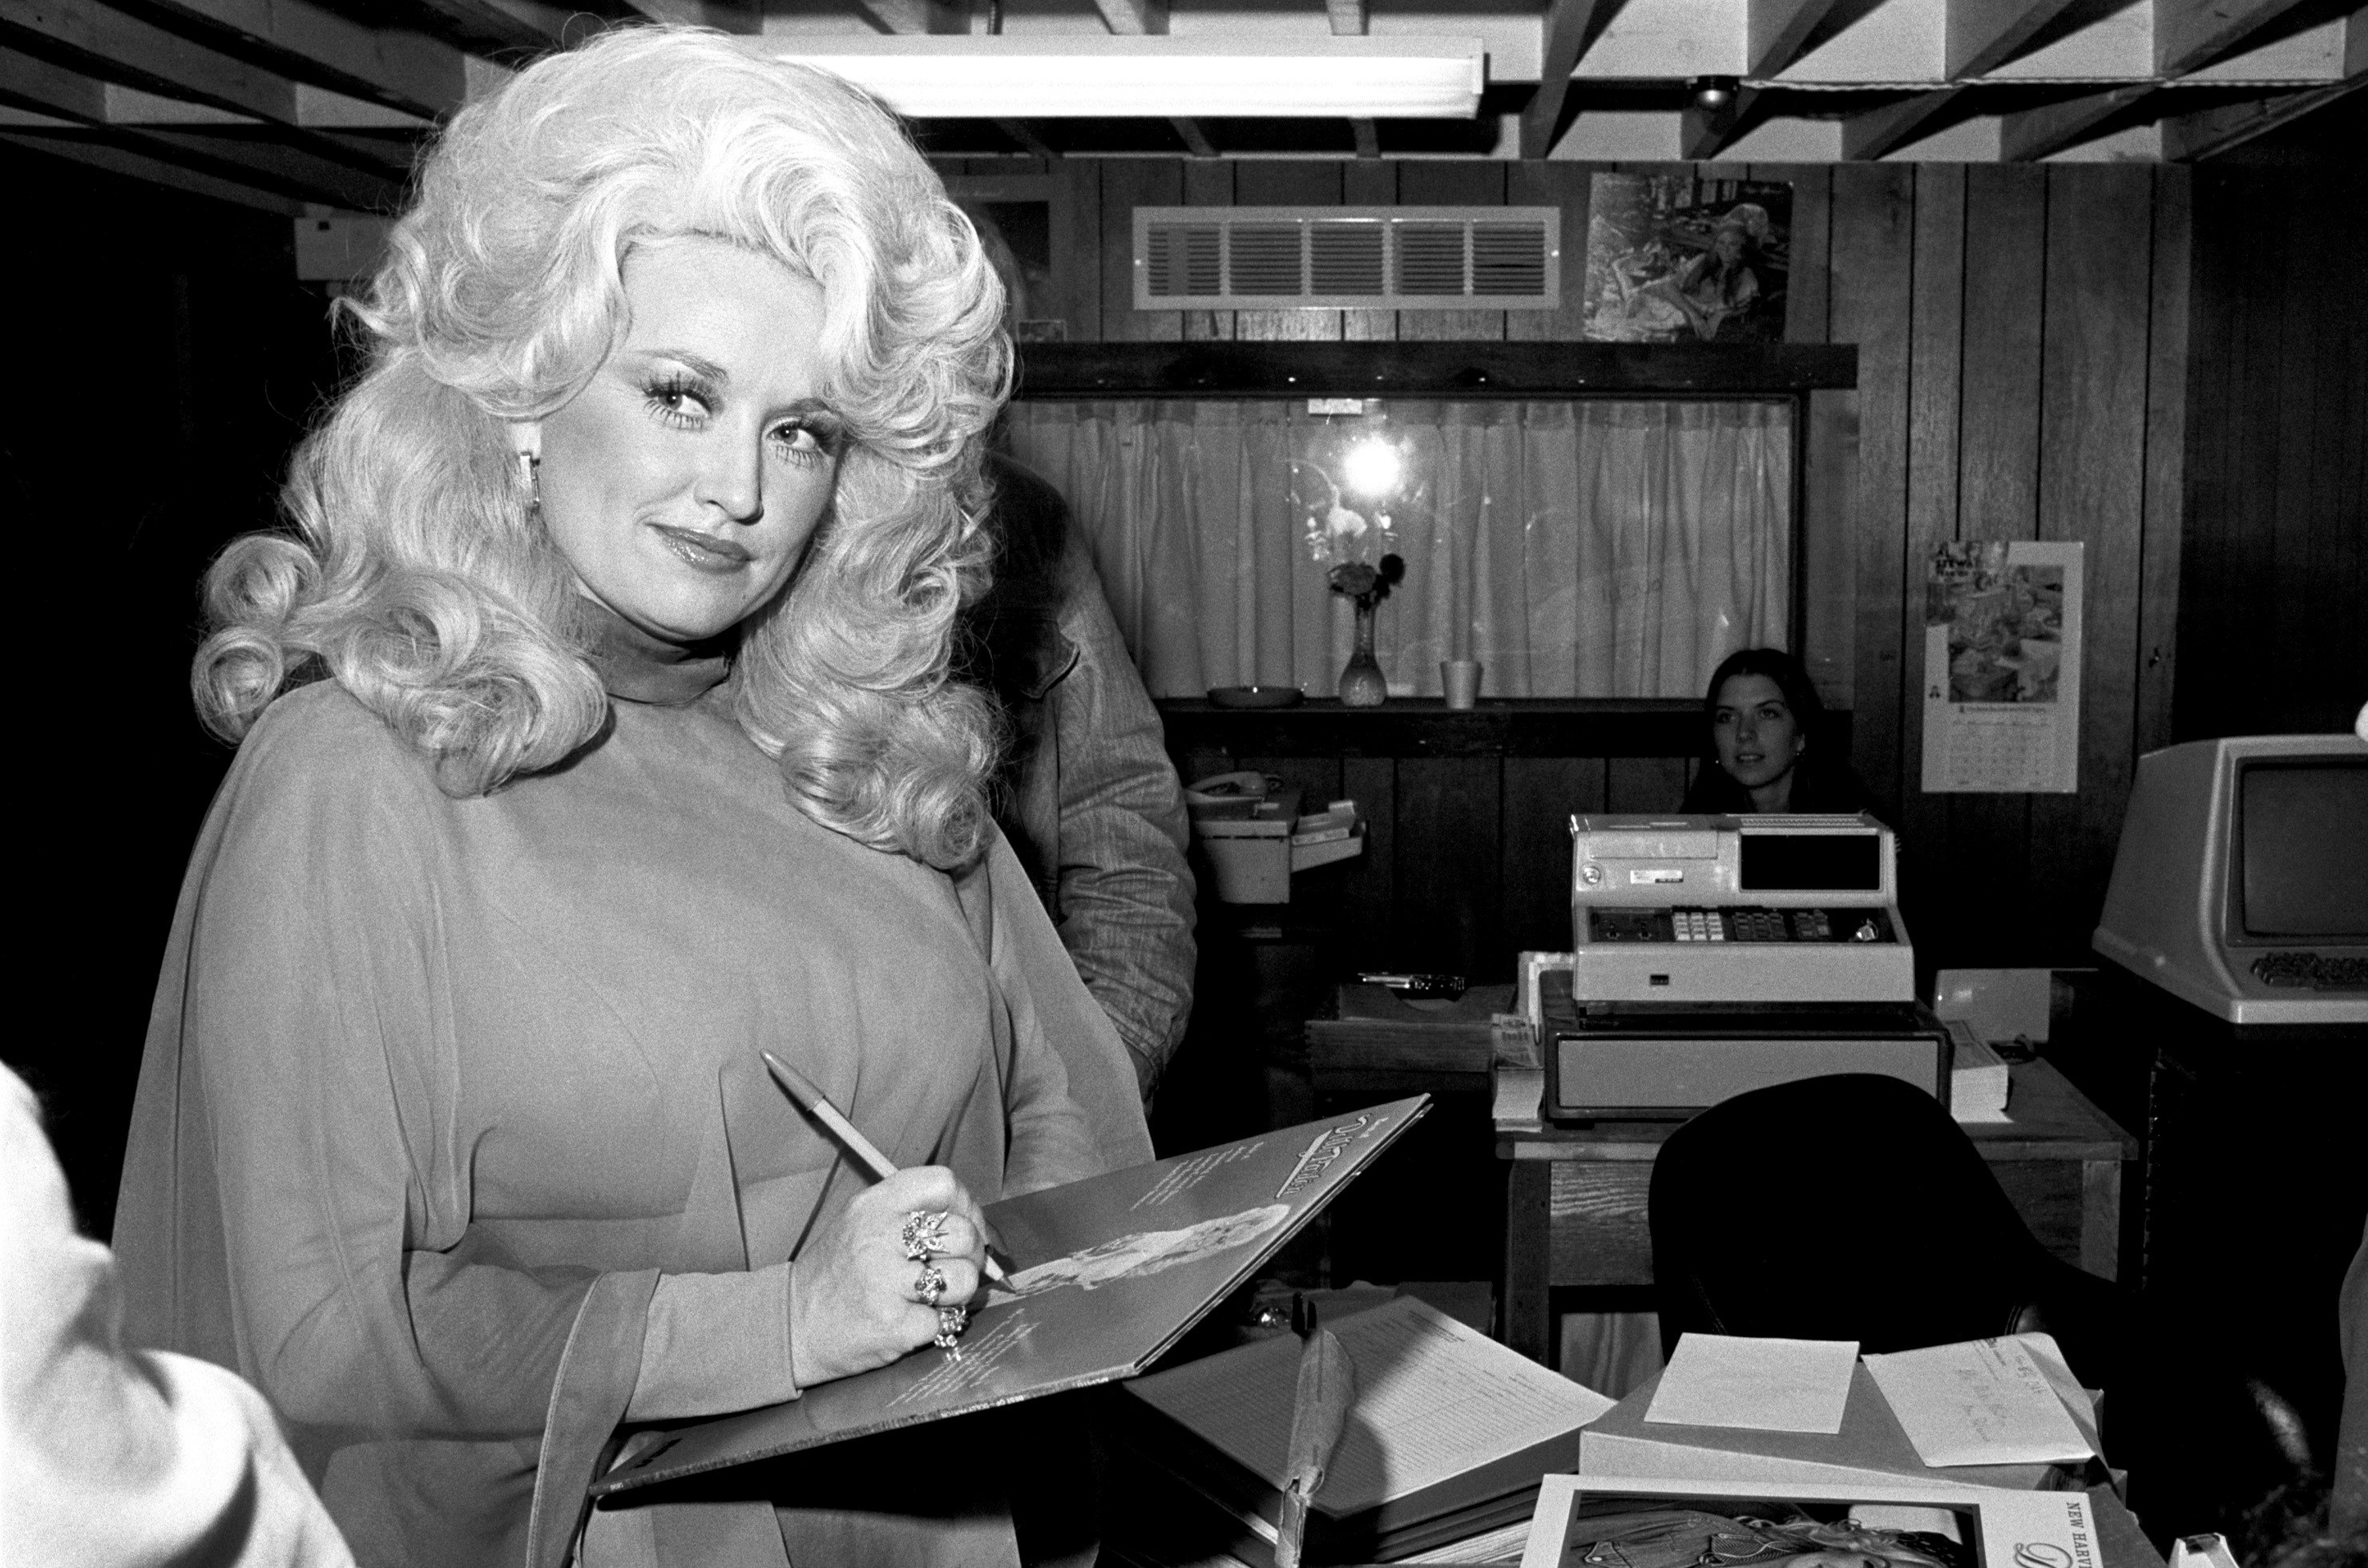 Dolly Parton is in the middle of writing her name on an album. She wears a turtleneck.